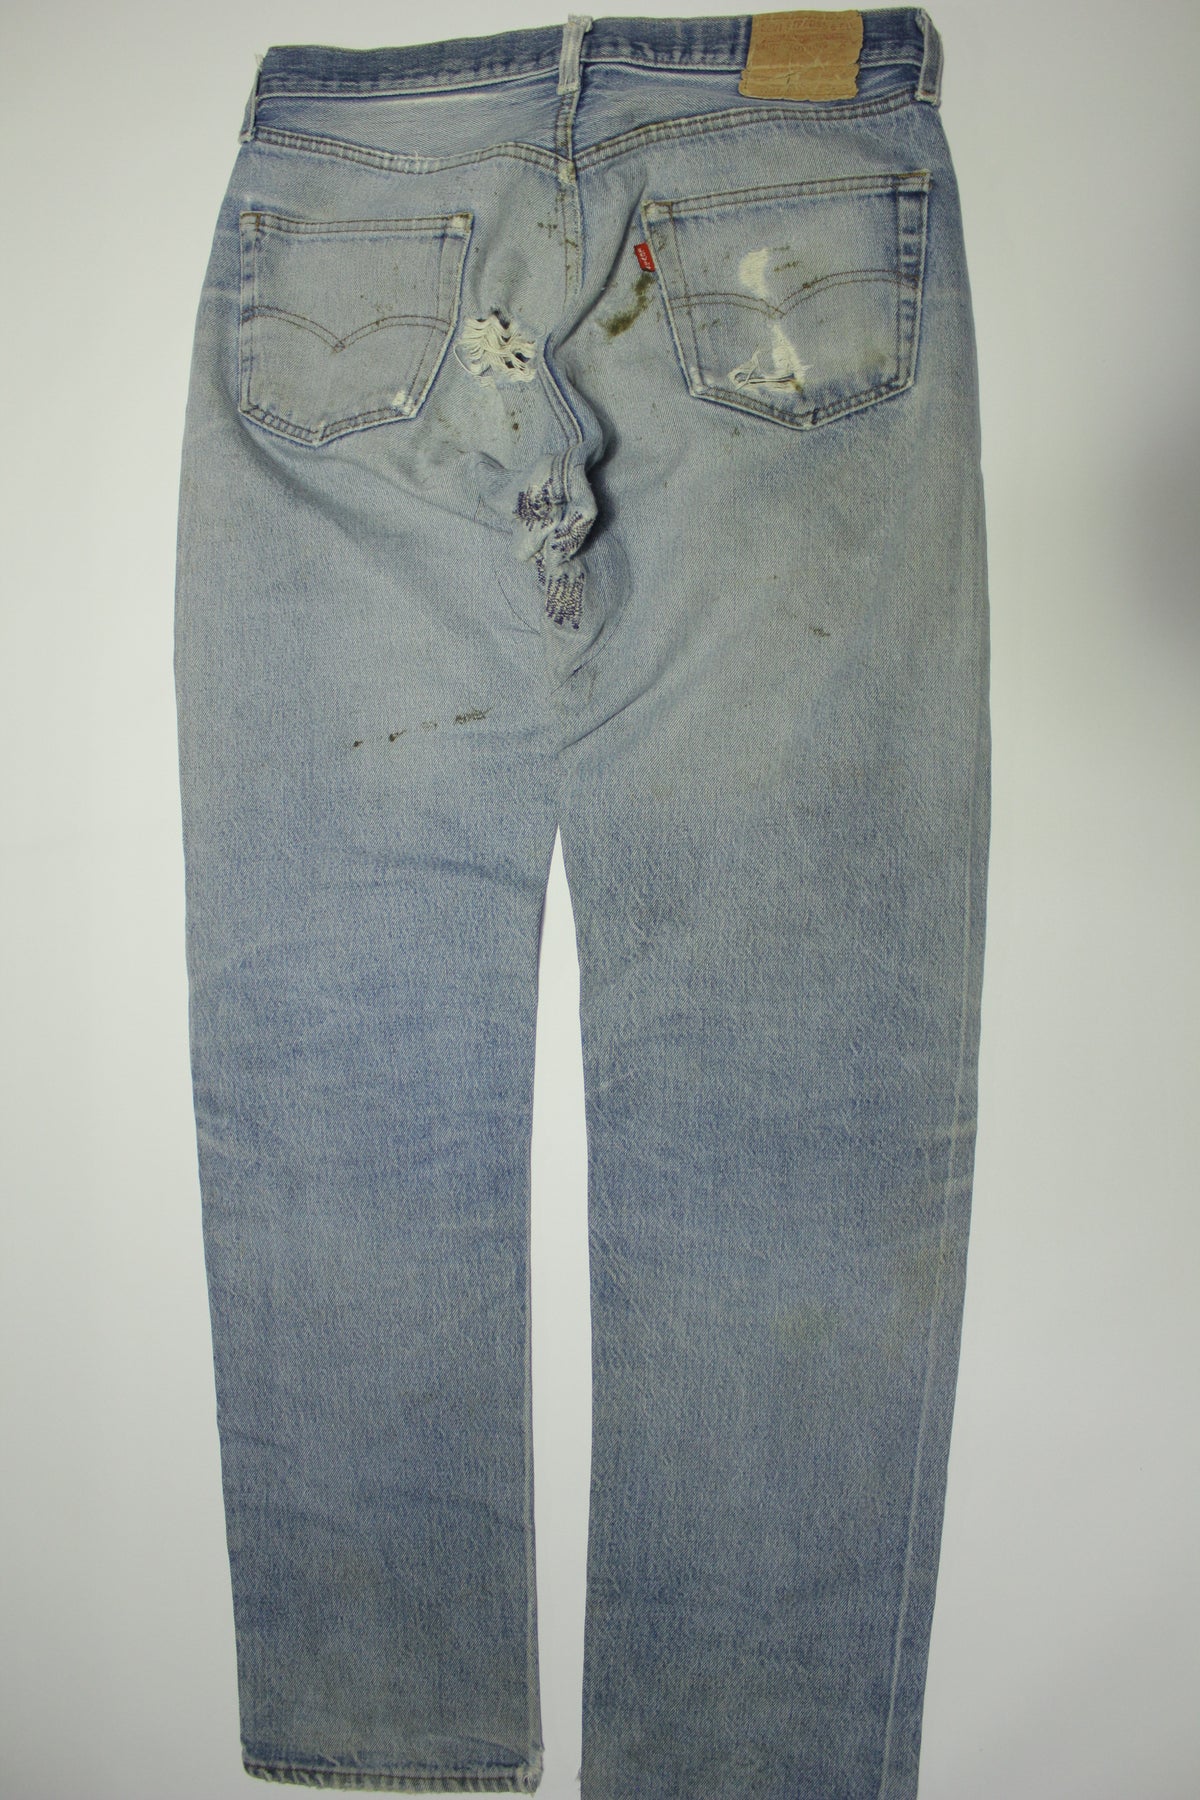 Levis 501-0117 Red Tab Vintage 70s 80's Made in USA Button Fly Denim Grunge Rocker Jeans